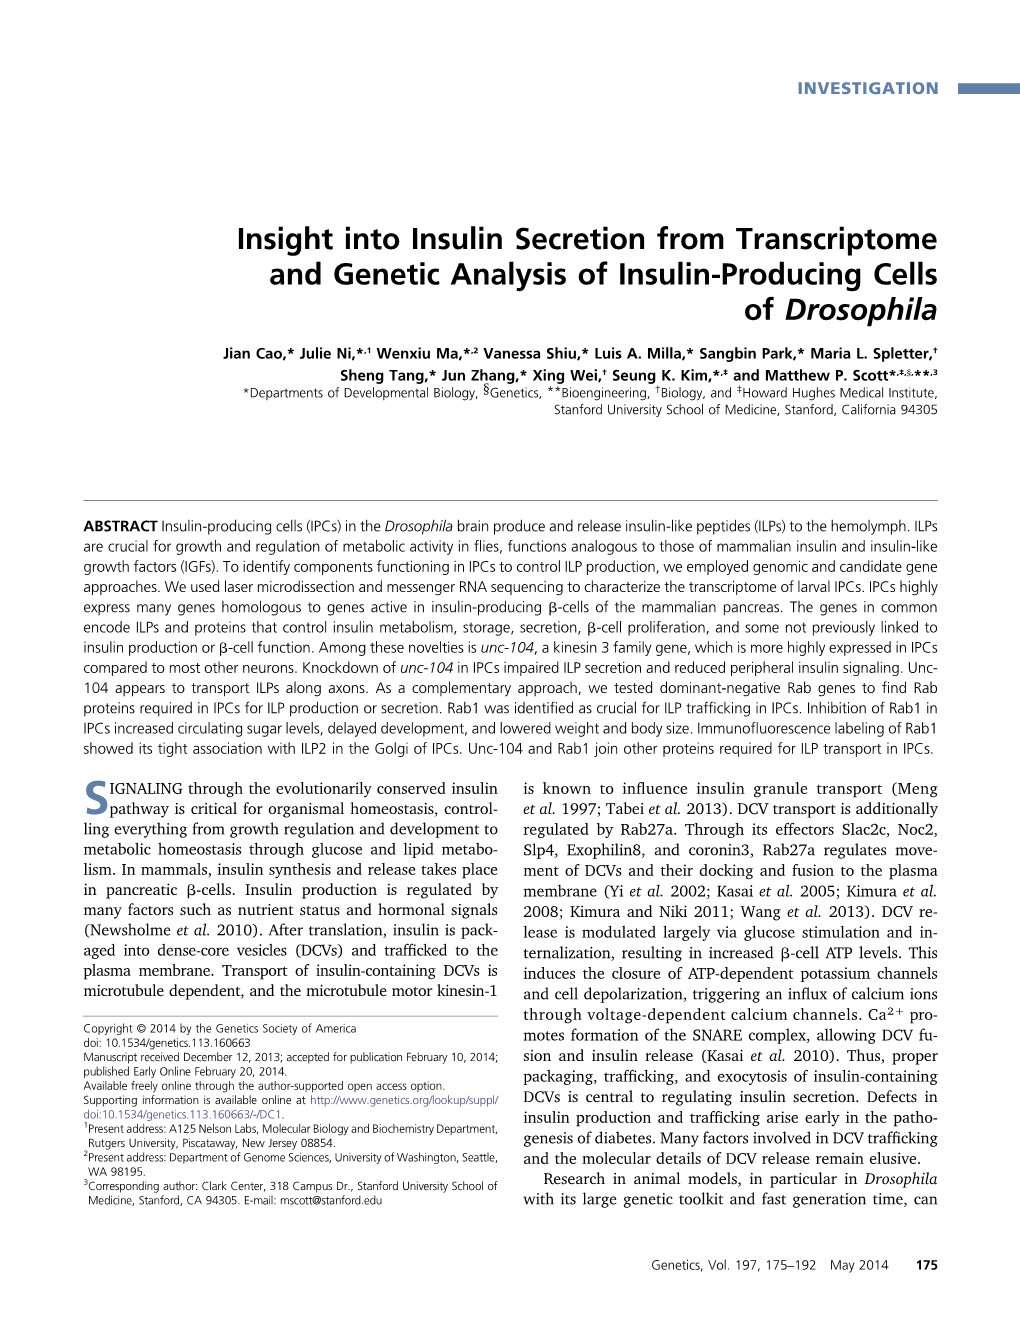 Insight Into Insulin Secretion from Transcriptome and Genetic Analysis of Insulin-Producing Cells of Drosophila